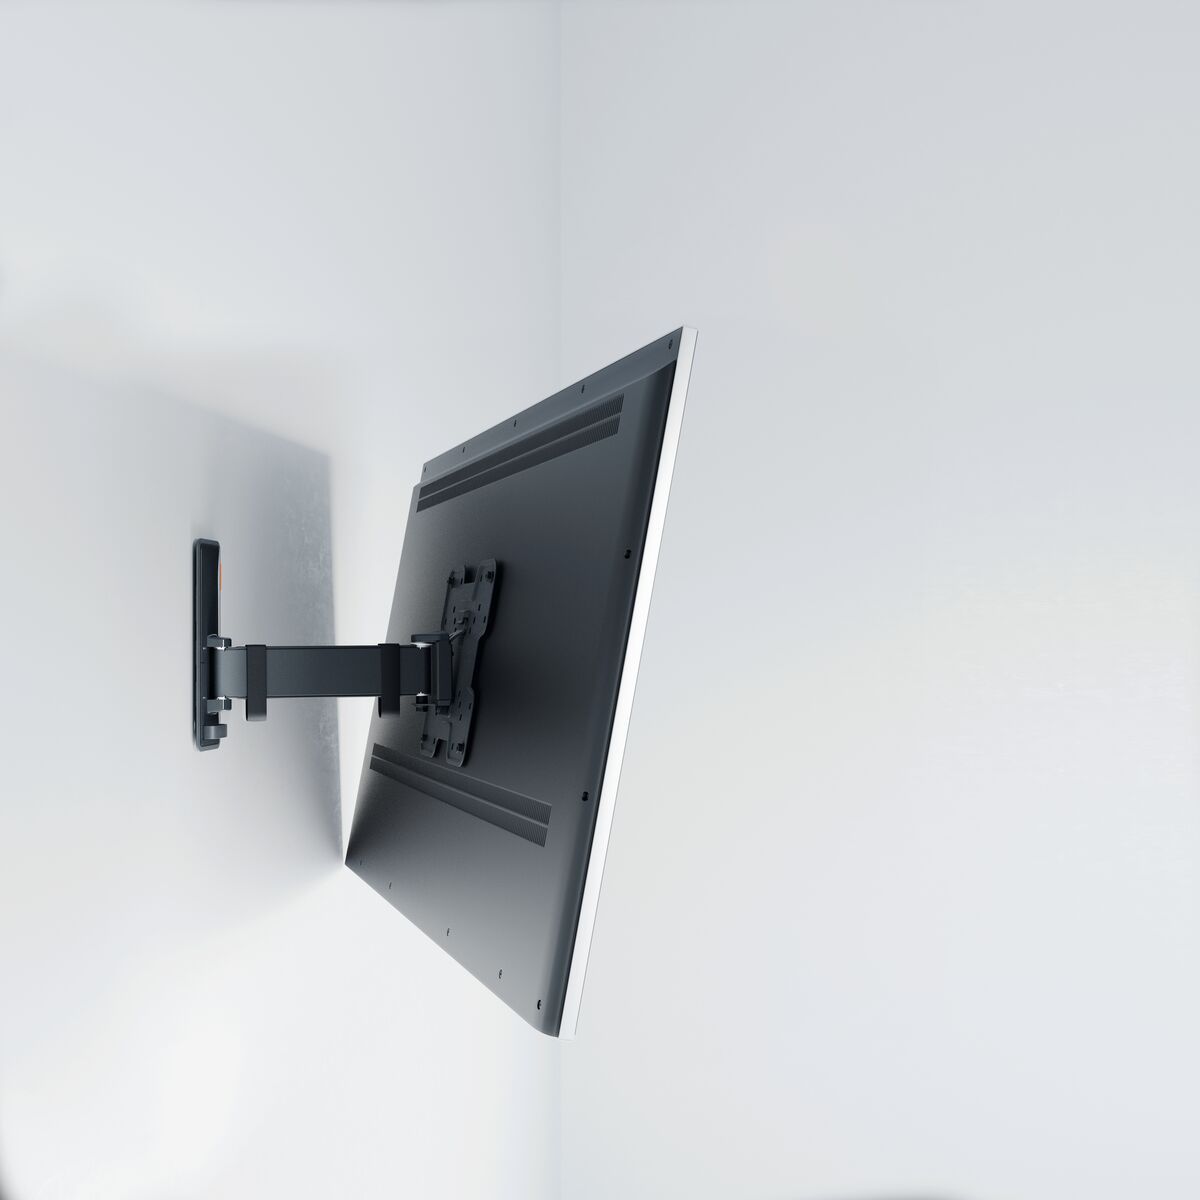 Vogel's TVM 3221 Full-Motion TV Wall Mount - Suitable for 19 up to 43 inch TVs - Up to 120° swivel - Tilt up to 20° - Application